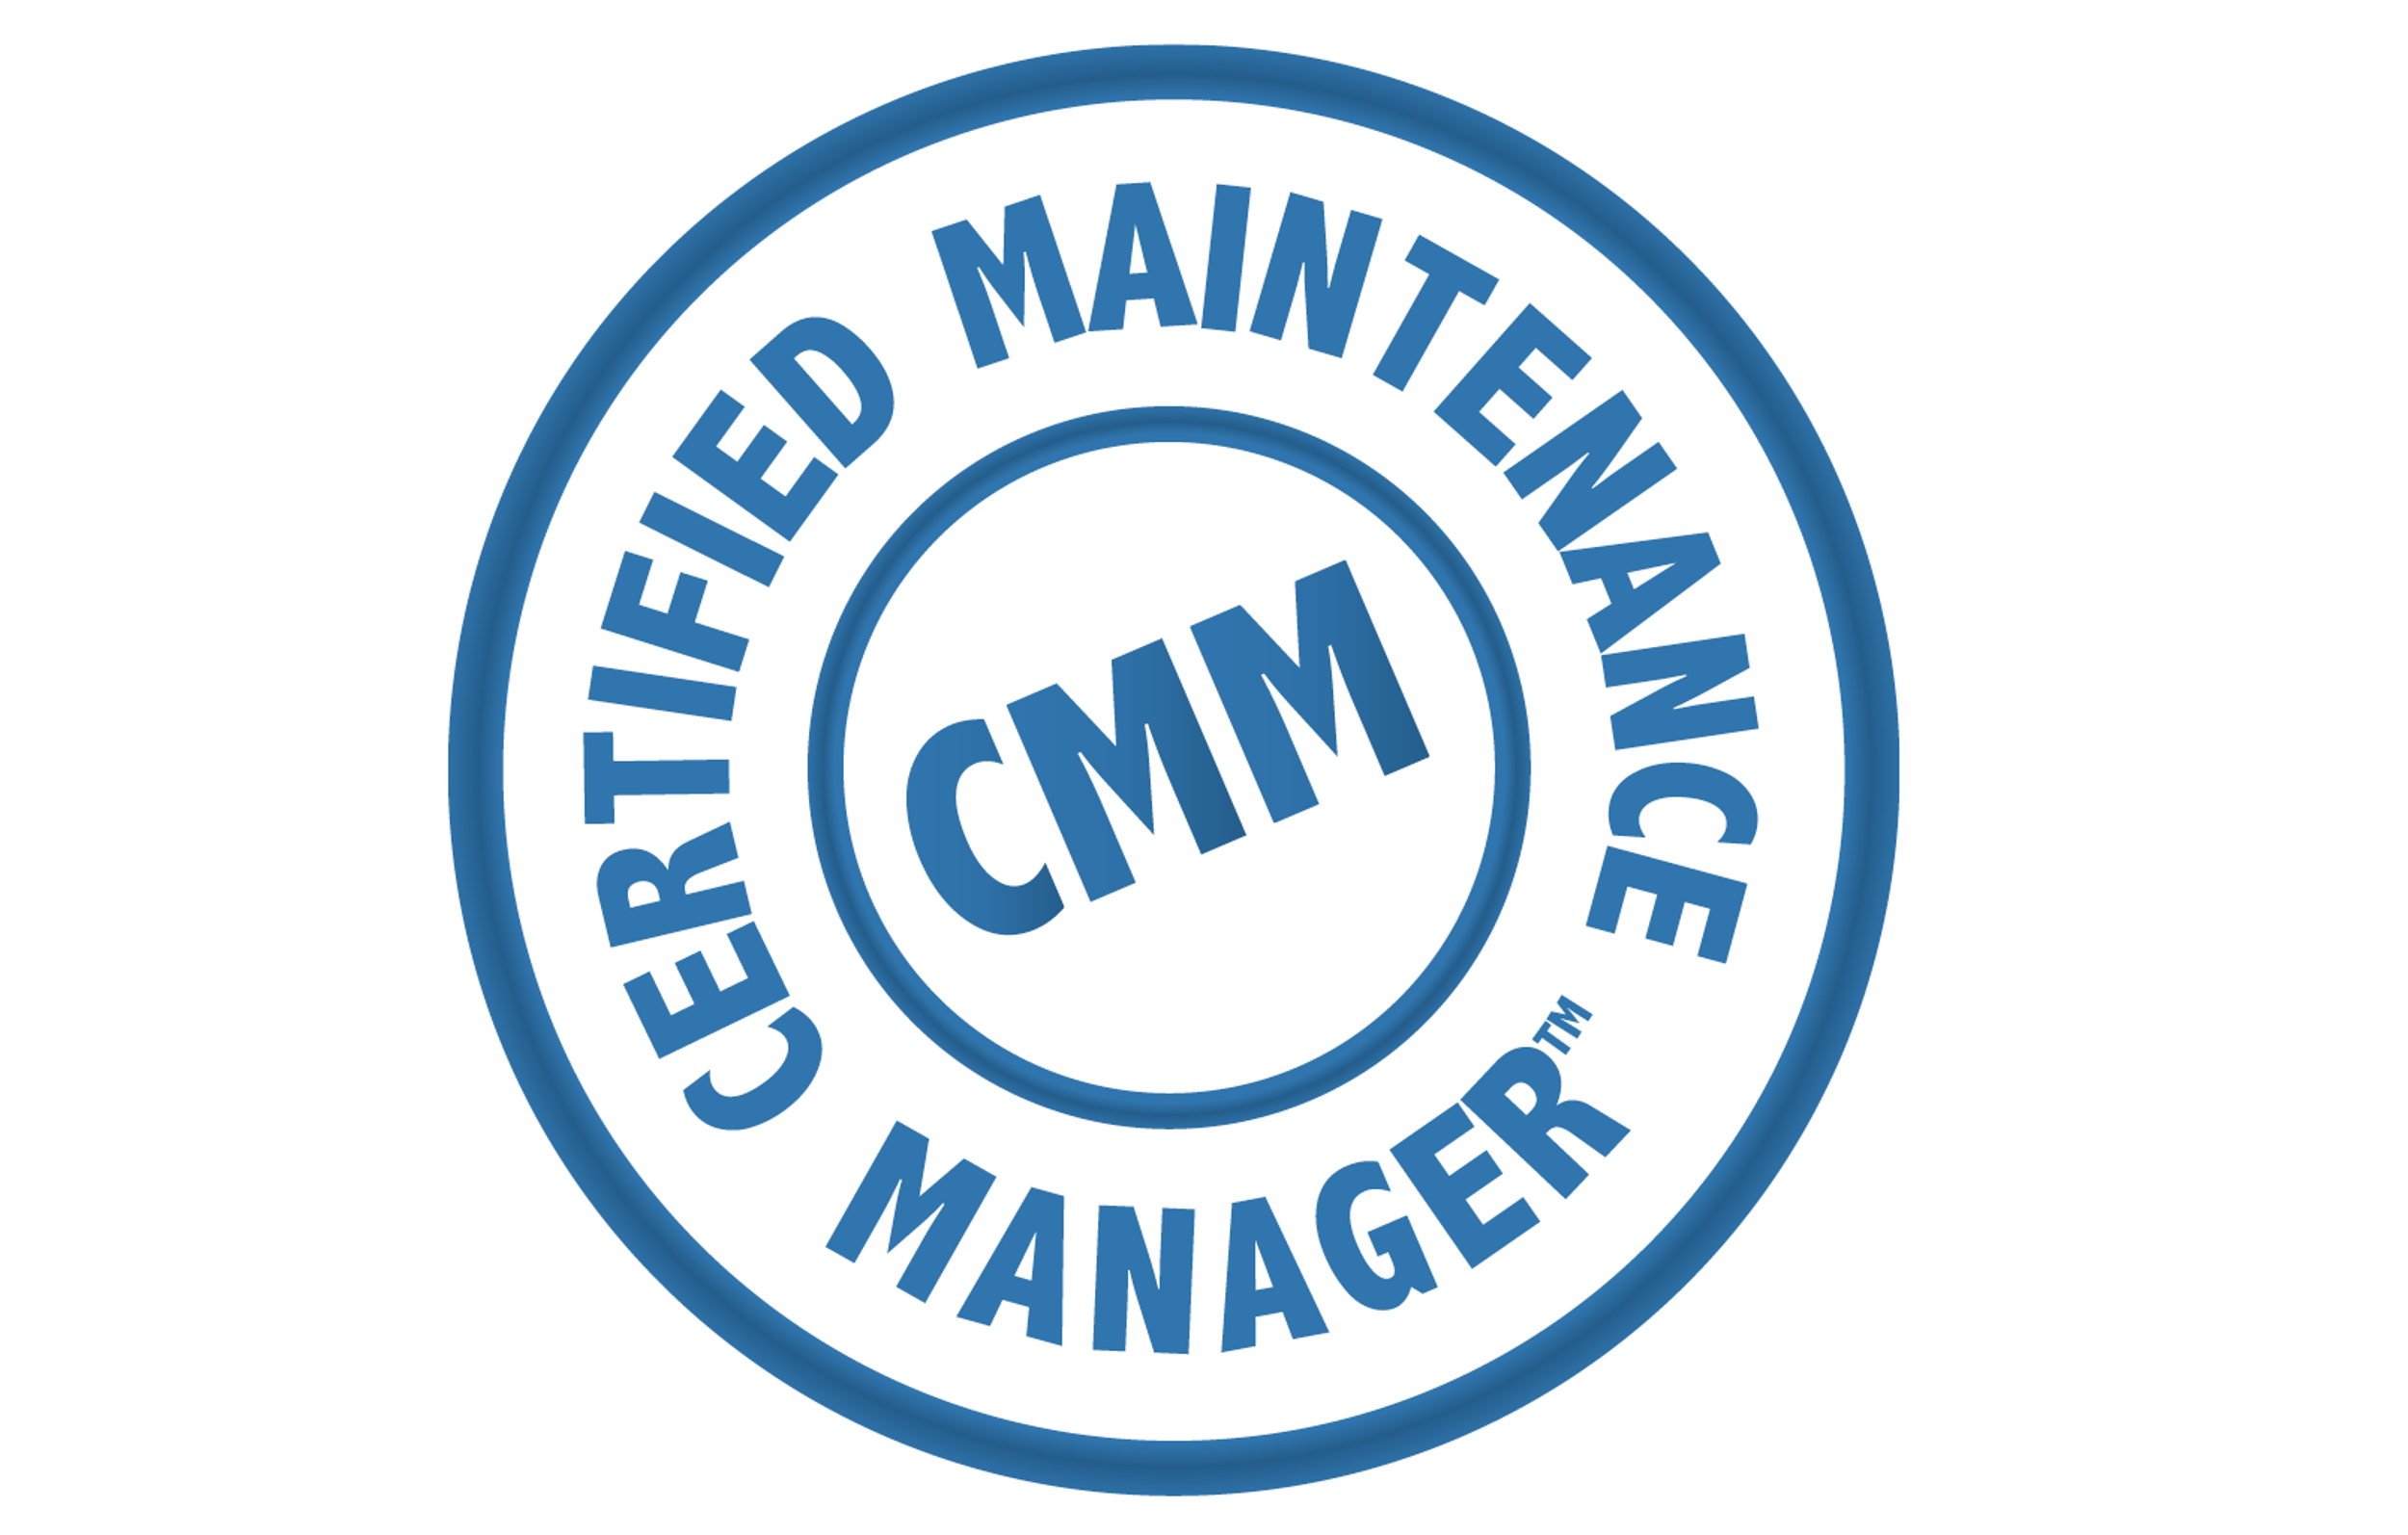 July 2022 Certified Maintenance Manager Workshop by Reliabilityweb.com (UK Timezone)